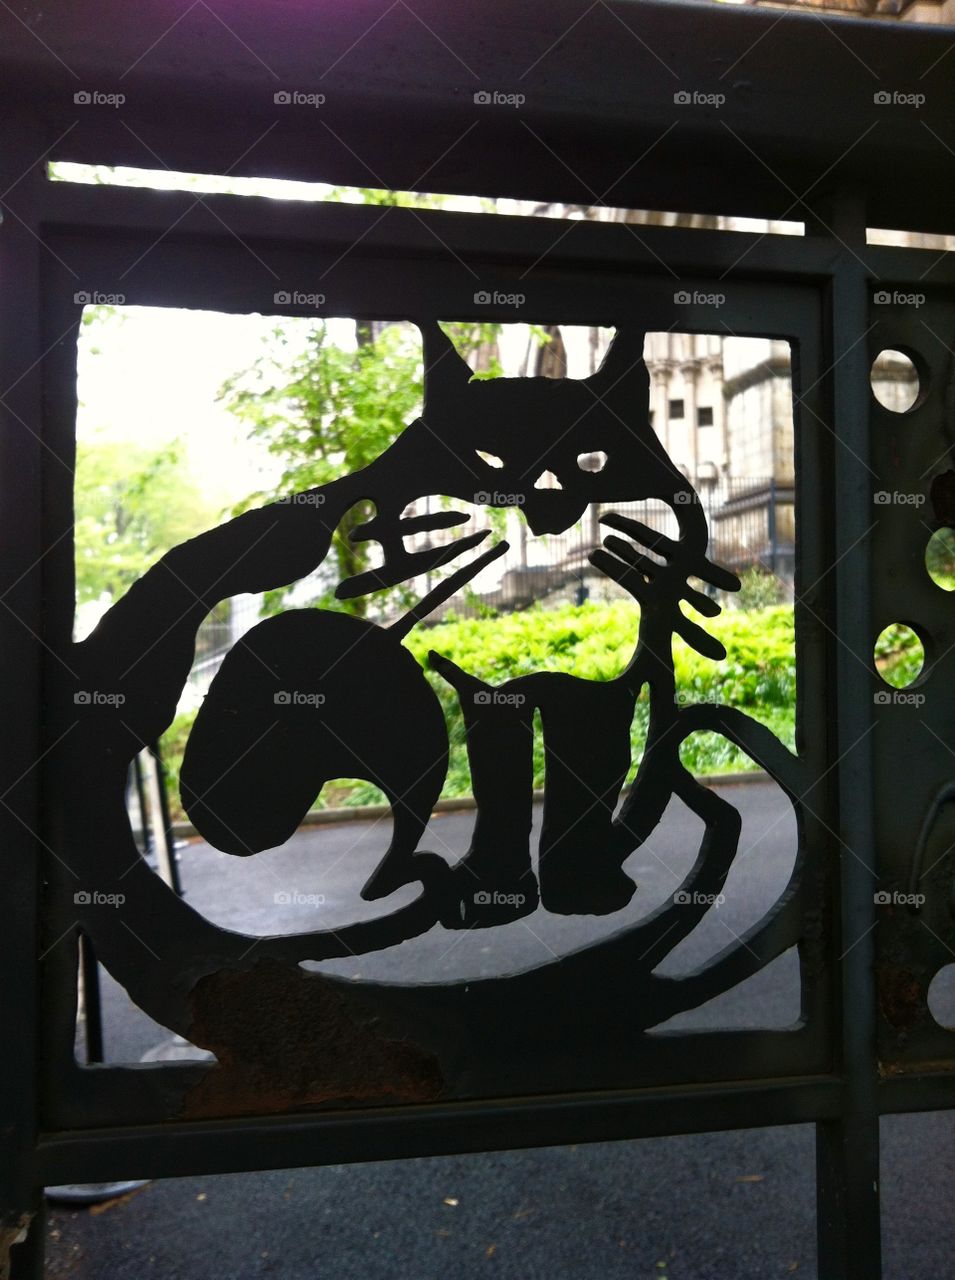 Kitty on a fence. A wrought iron fence incorporates the kitty into its design